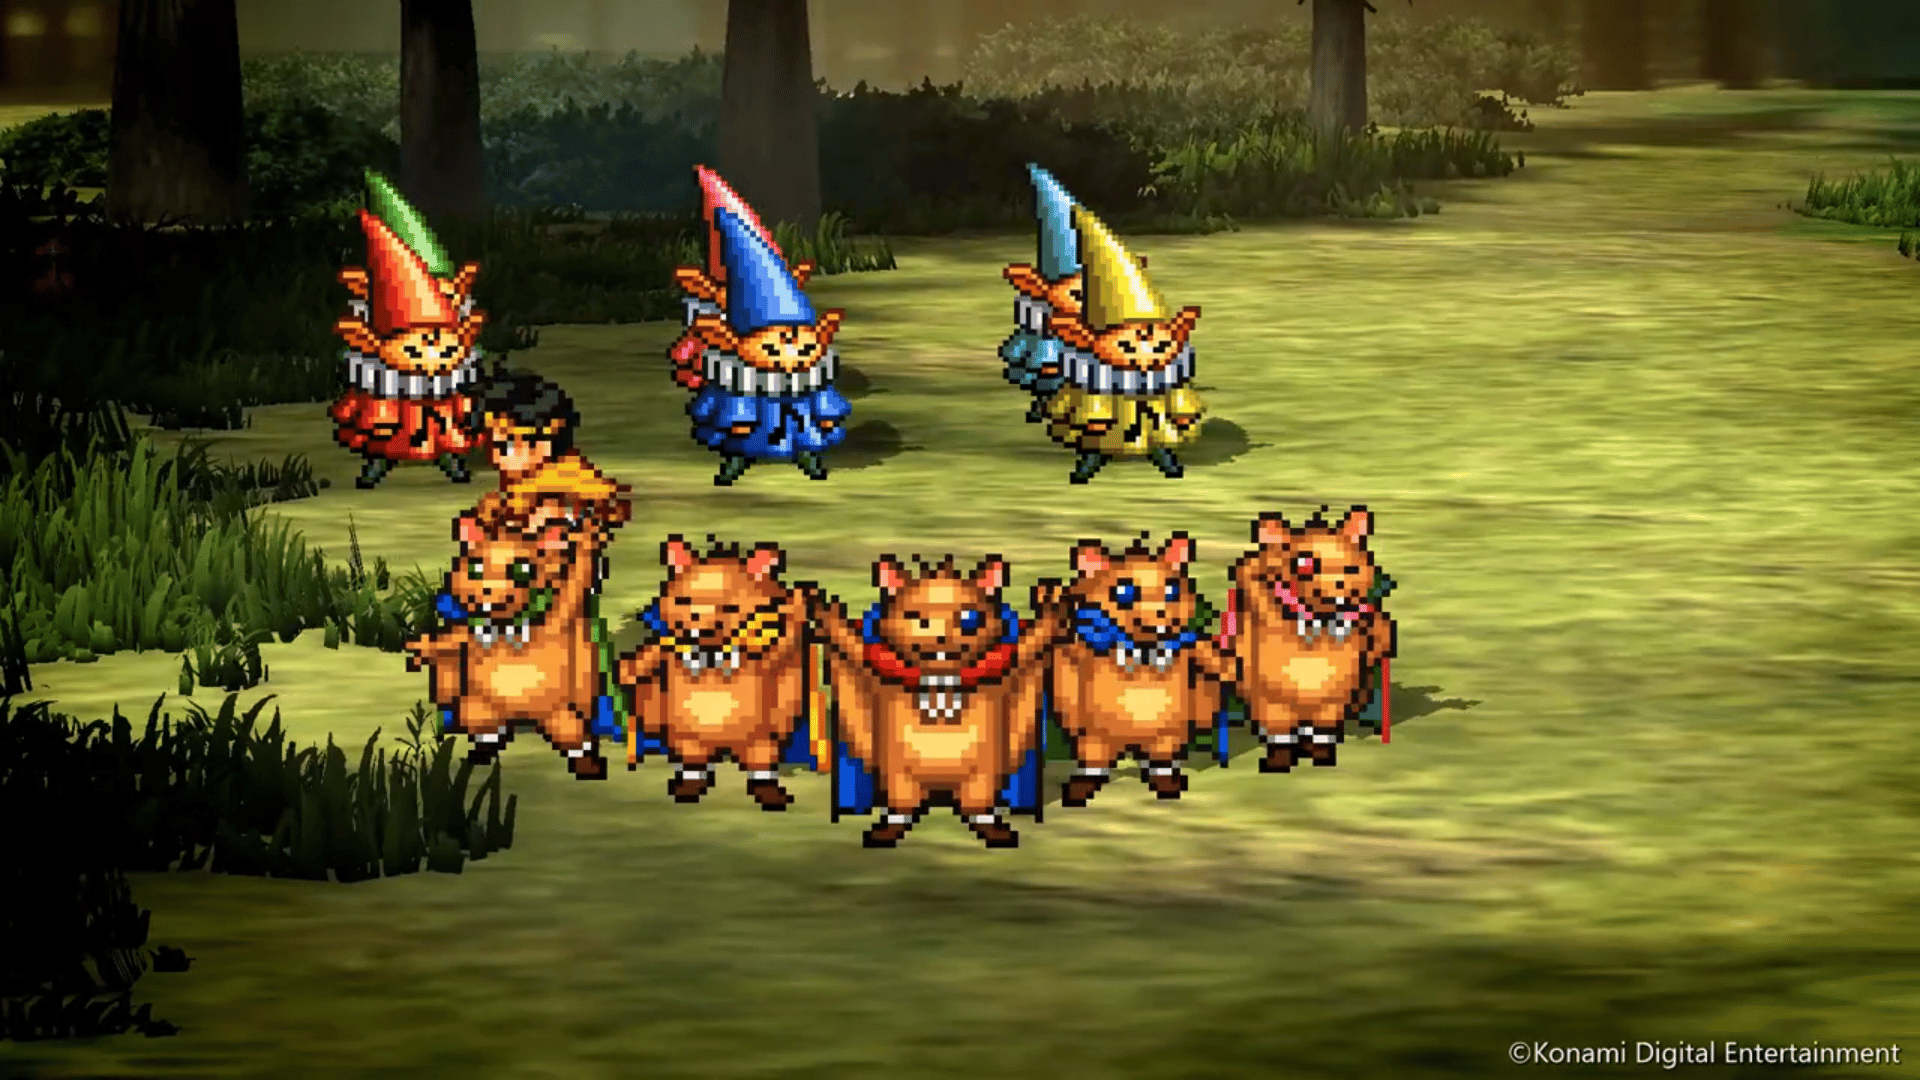 Suikoden I & II HD Remaster Shares English Gameplay Clips of Soul Eater & Five Squirrel Attack